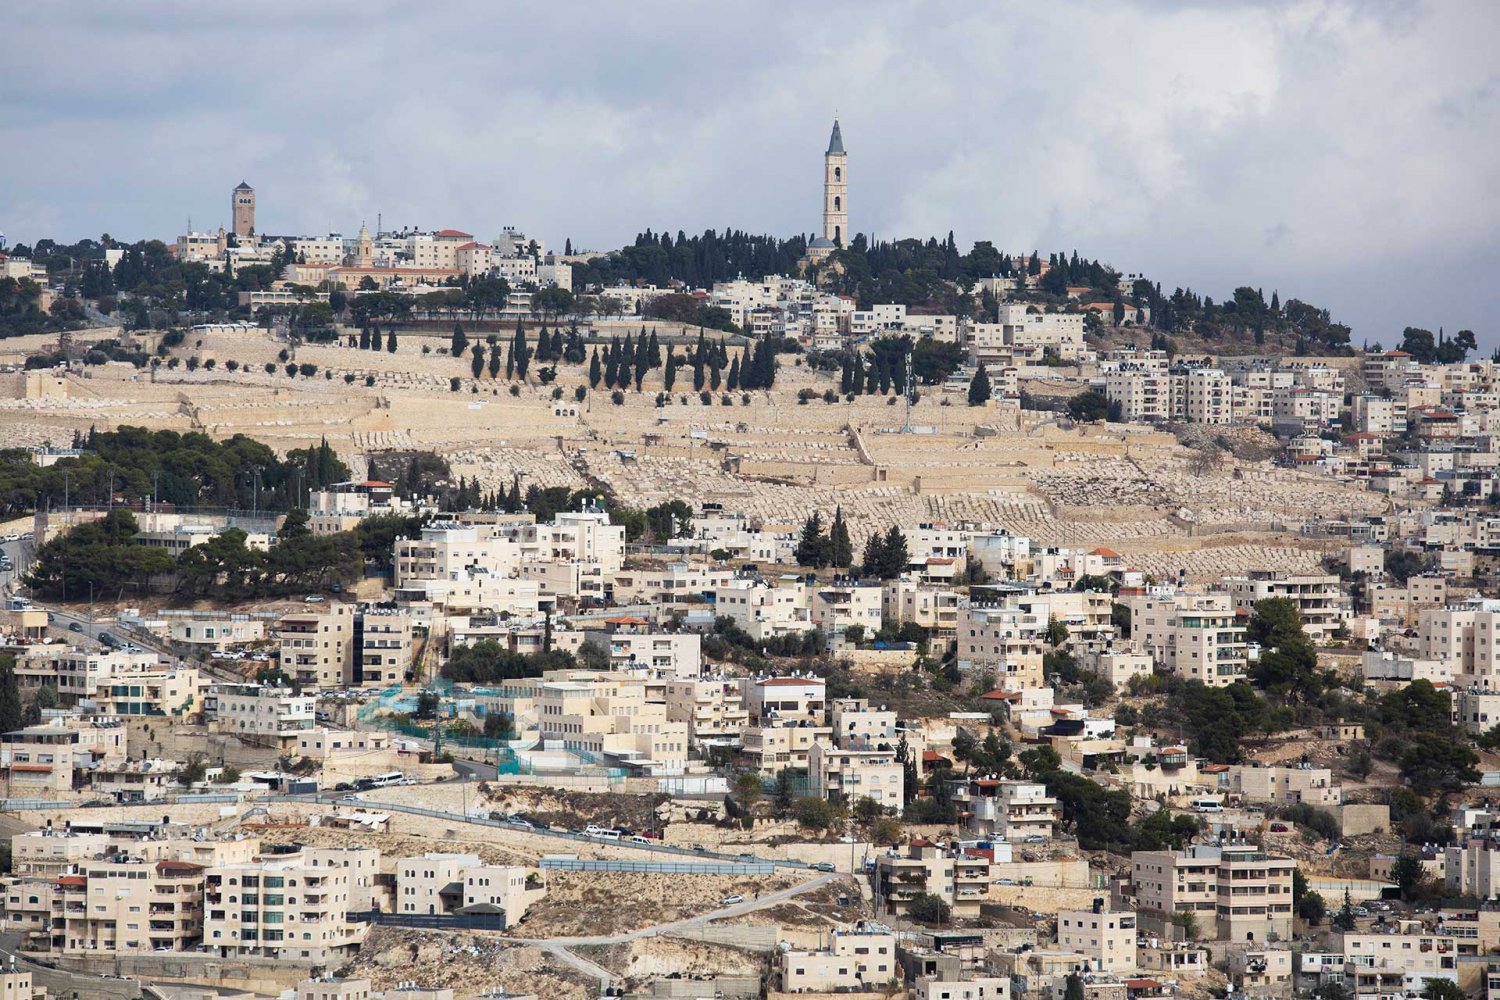 Palestinian neighborhoods of Silwan and the Mount of Olives above